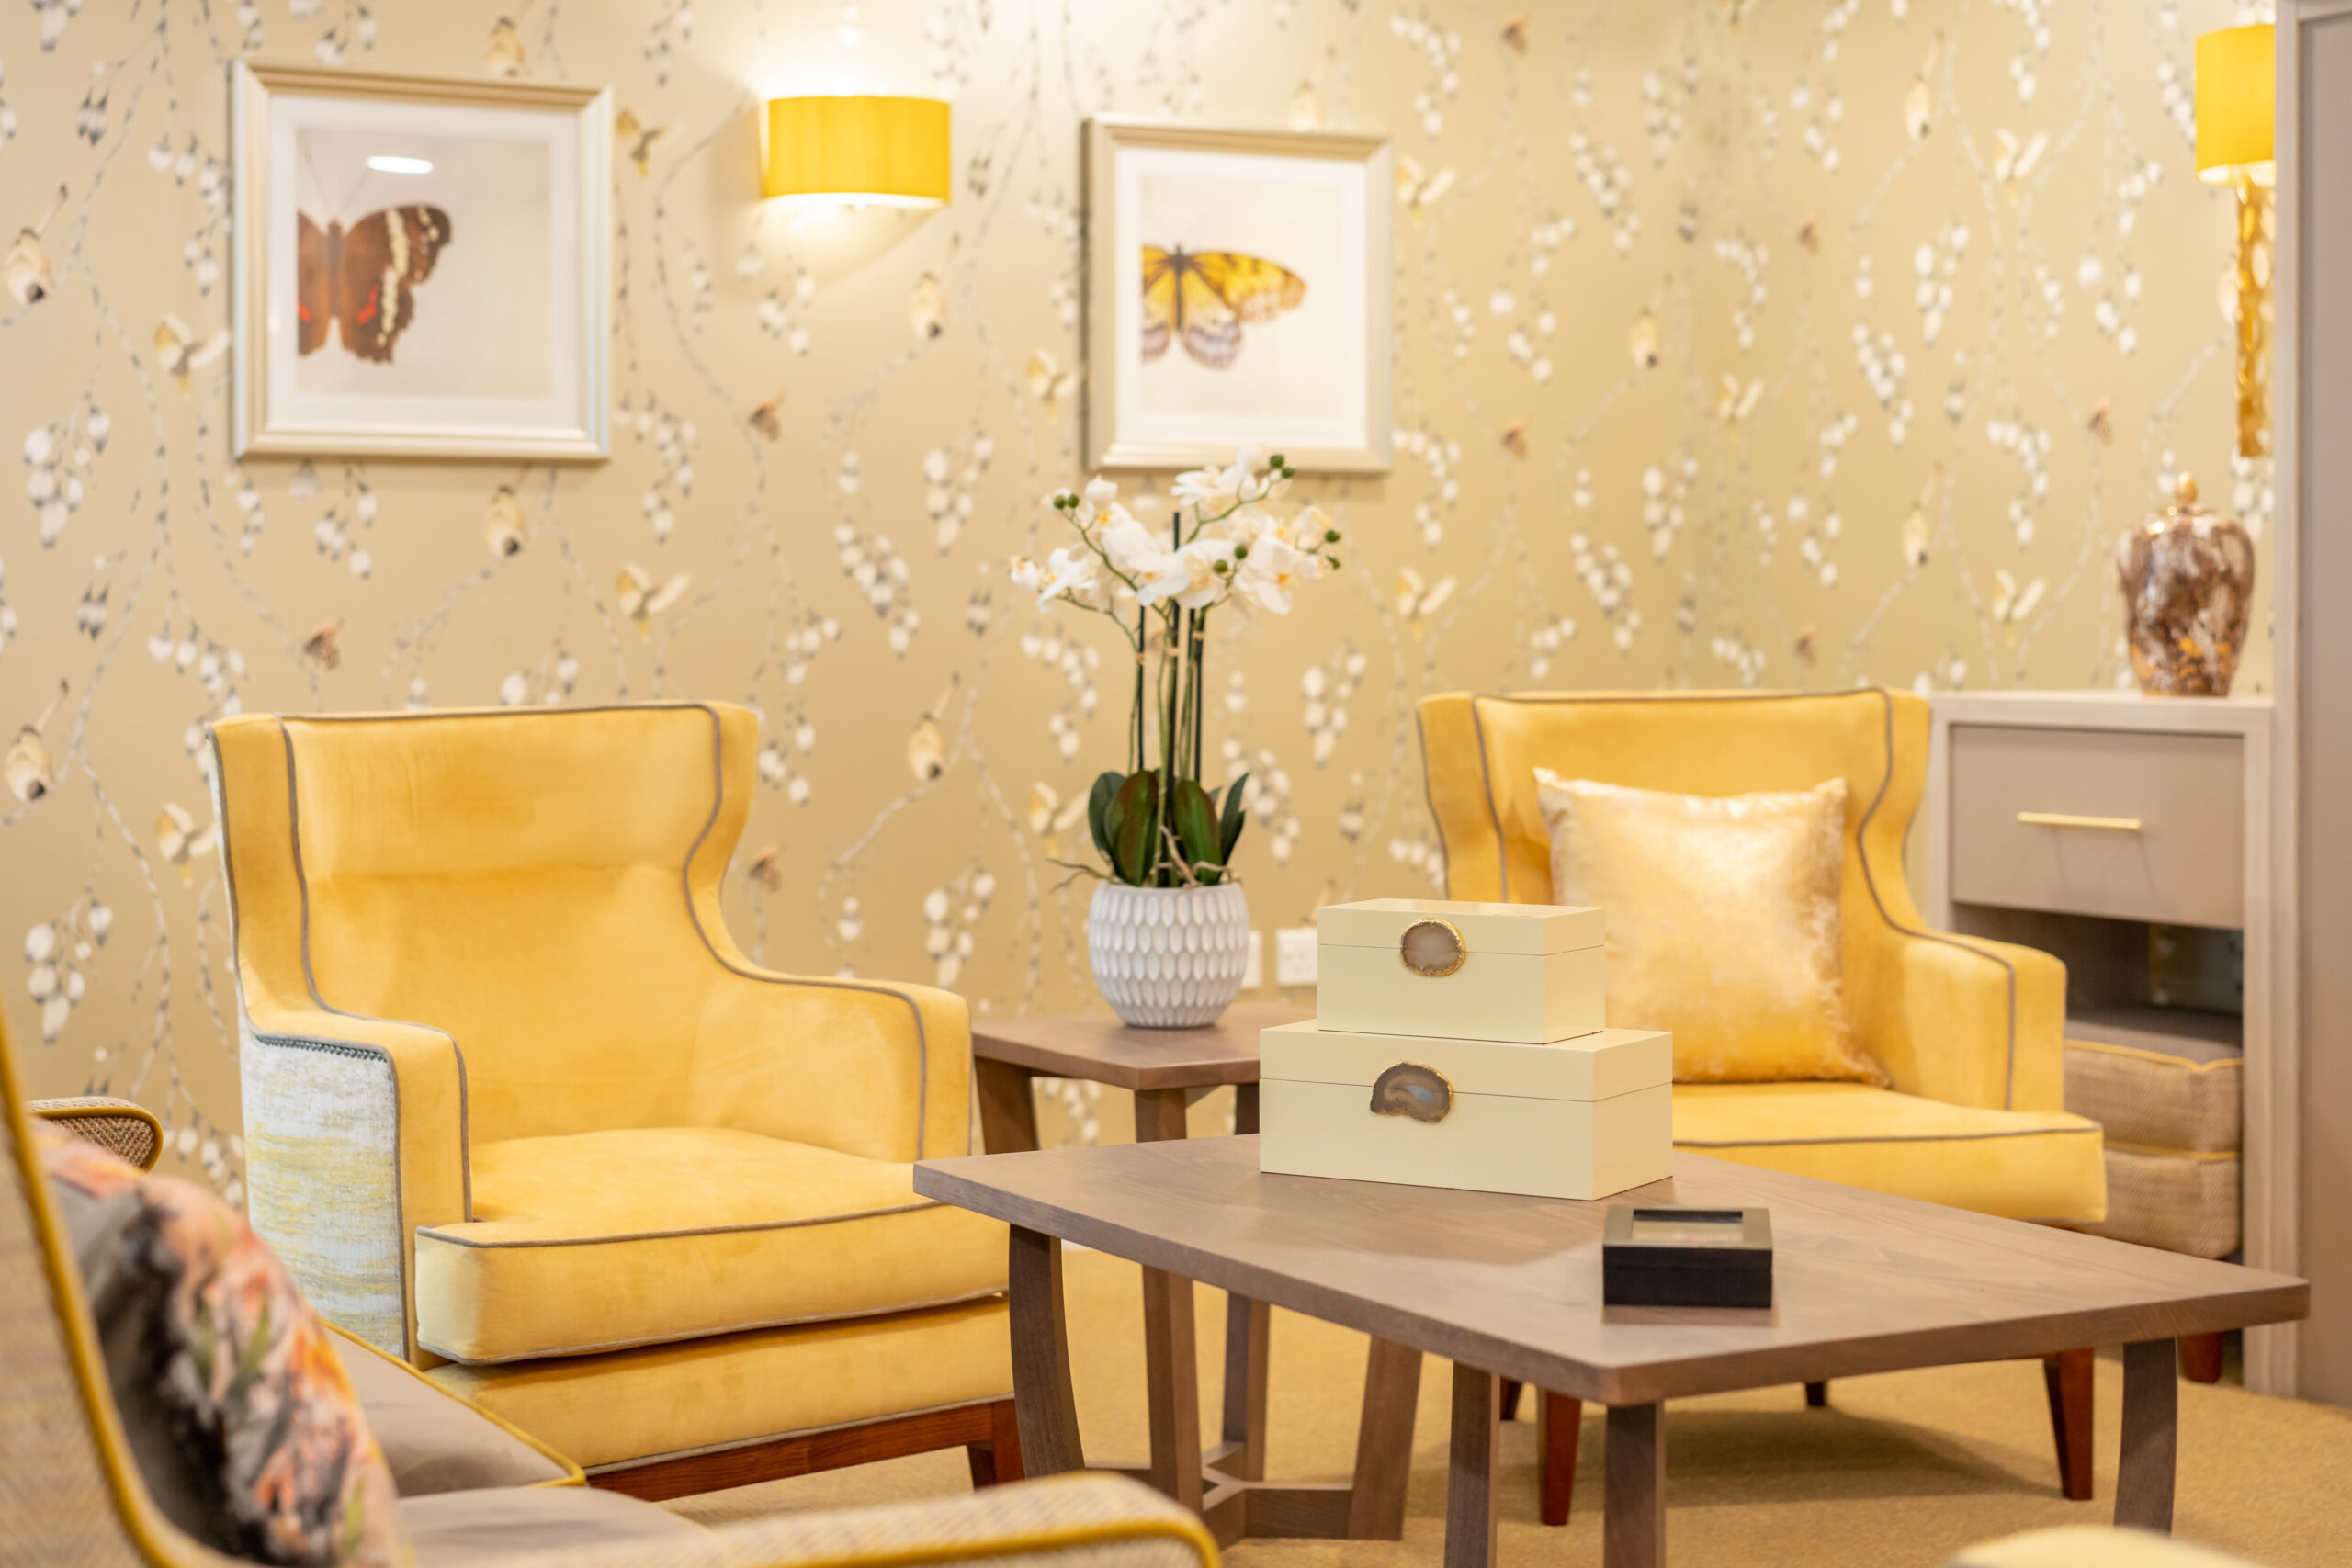 Lounge area with butterly pictures on wall at Birchwood Heights Care Home